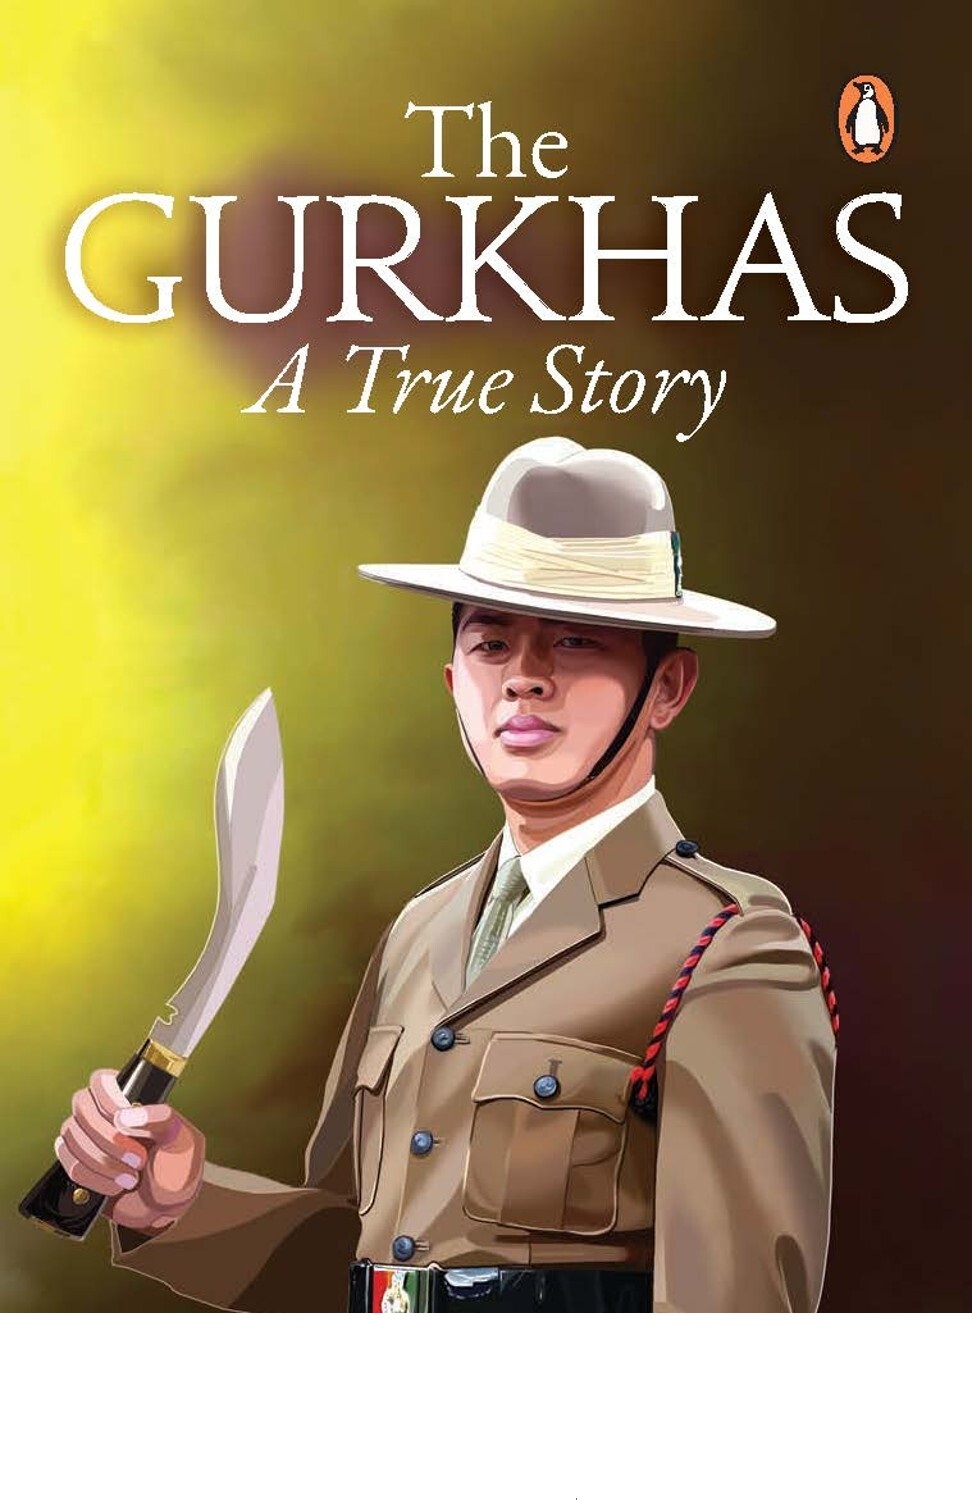 Ex-British Gurkha's folklore, narratives available in book form